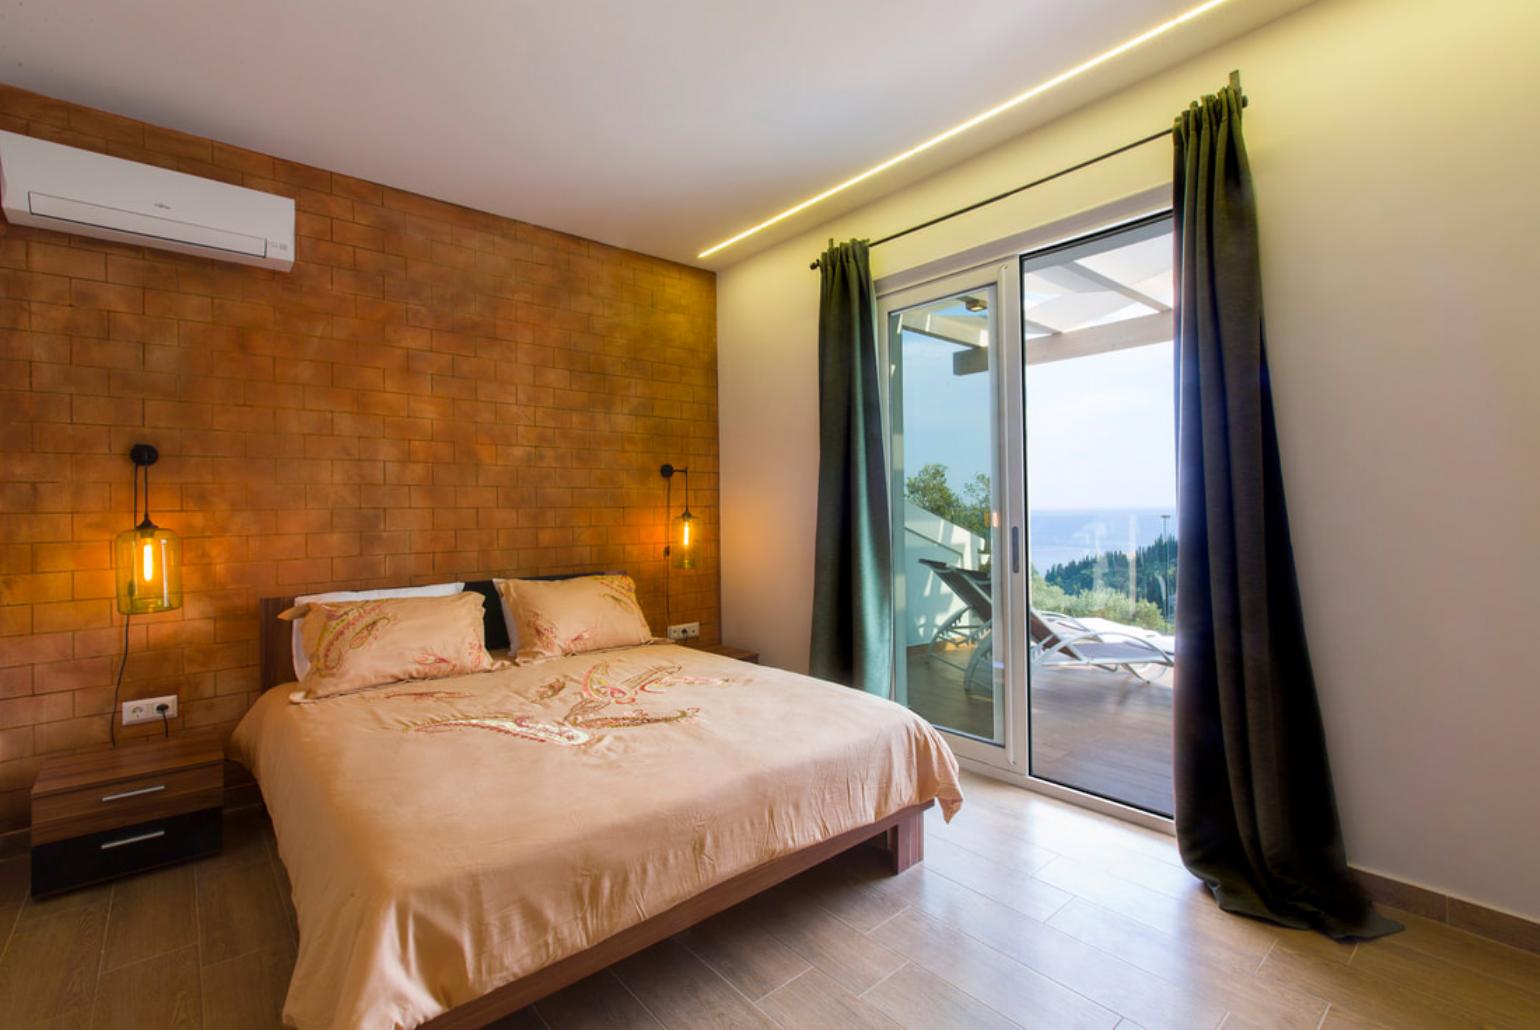 Doble en suite bedroom with sea view and jacuzzi 